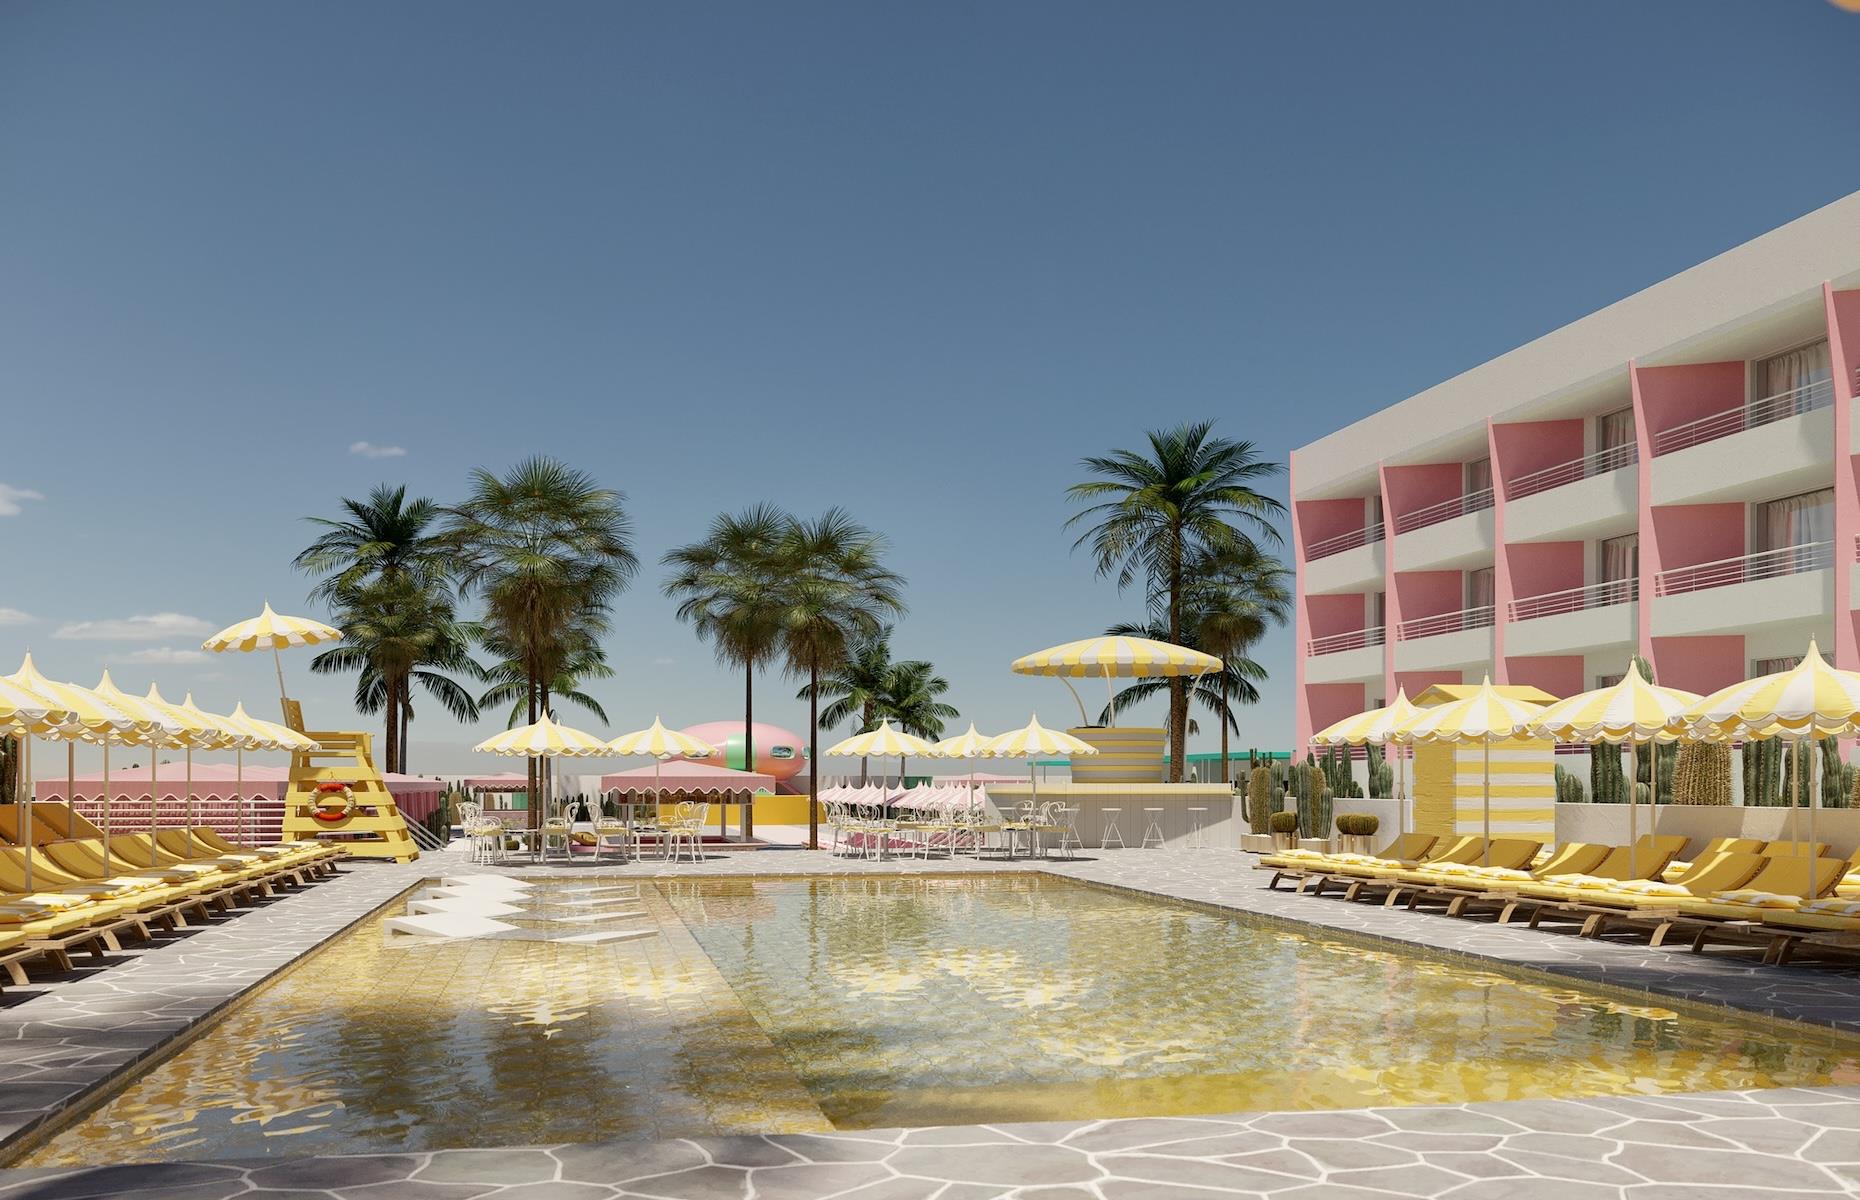 <p>Dedicated followers of fashion will adore this retro-fashion inspired hotel from The Concept Hotels group, on track to open this summer. A Sixties Palm Springs aesthetic meets blissed-out Balearic feels at the pastel-hued Los Felices Ibiza to pleasing effect. It’s far from an identikit fit out, with each of its suites and villas individually designed by a different fashion designer. Set on San Jose Bay, it will have a pose-worthy pool area and see-and-be-seen restaurant, along with a boutique selling fashion magazines and style books.</p>